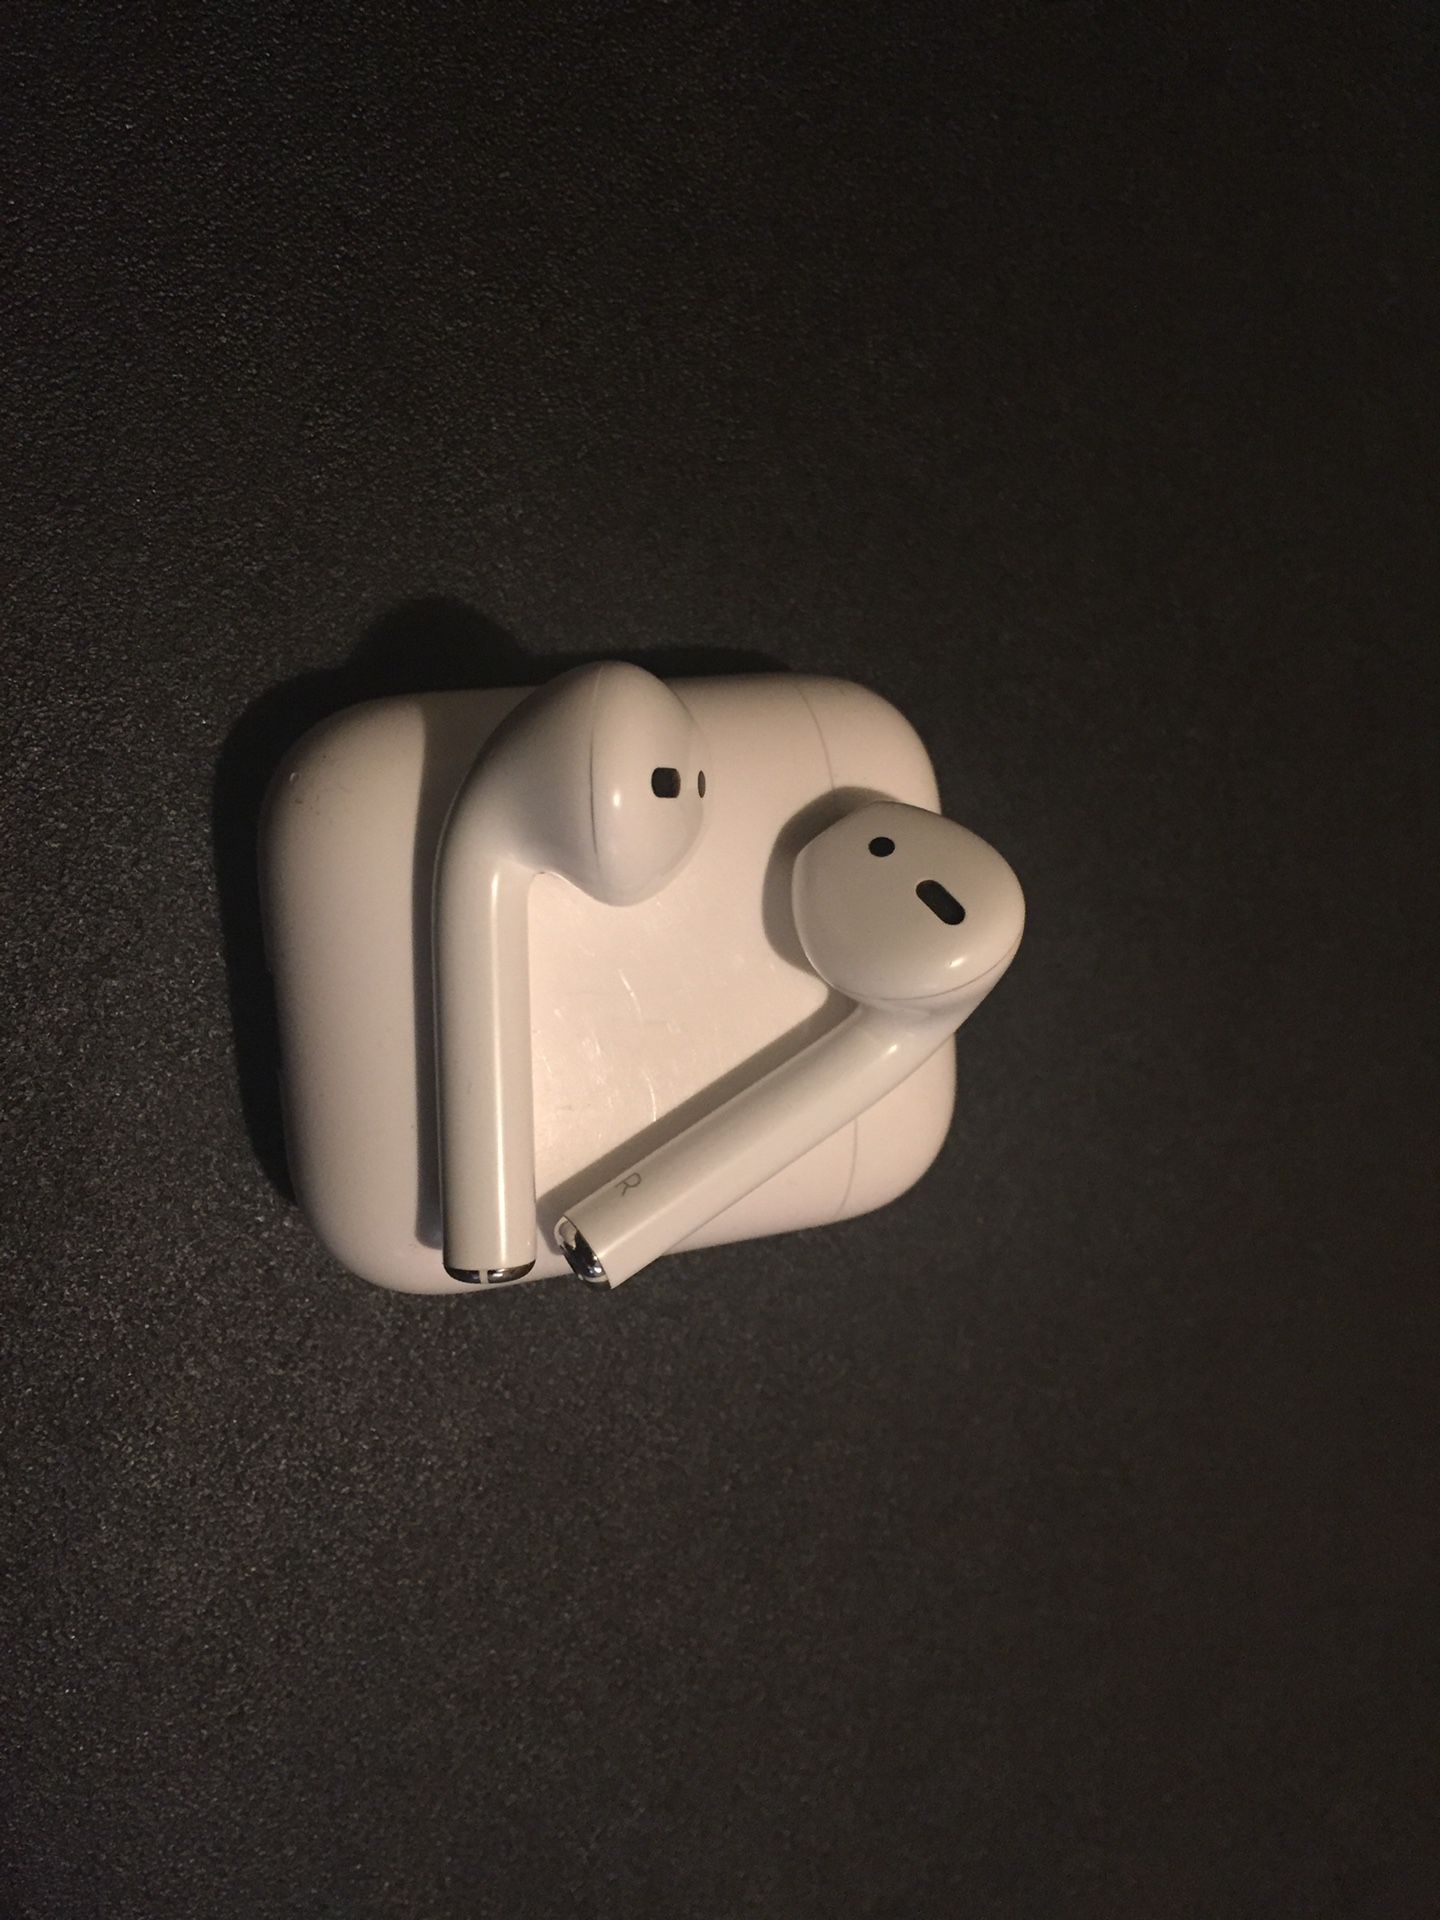 Apple AirPods !